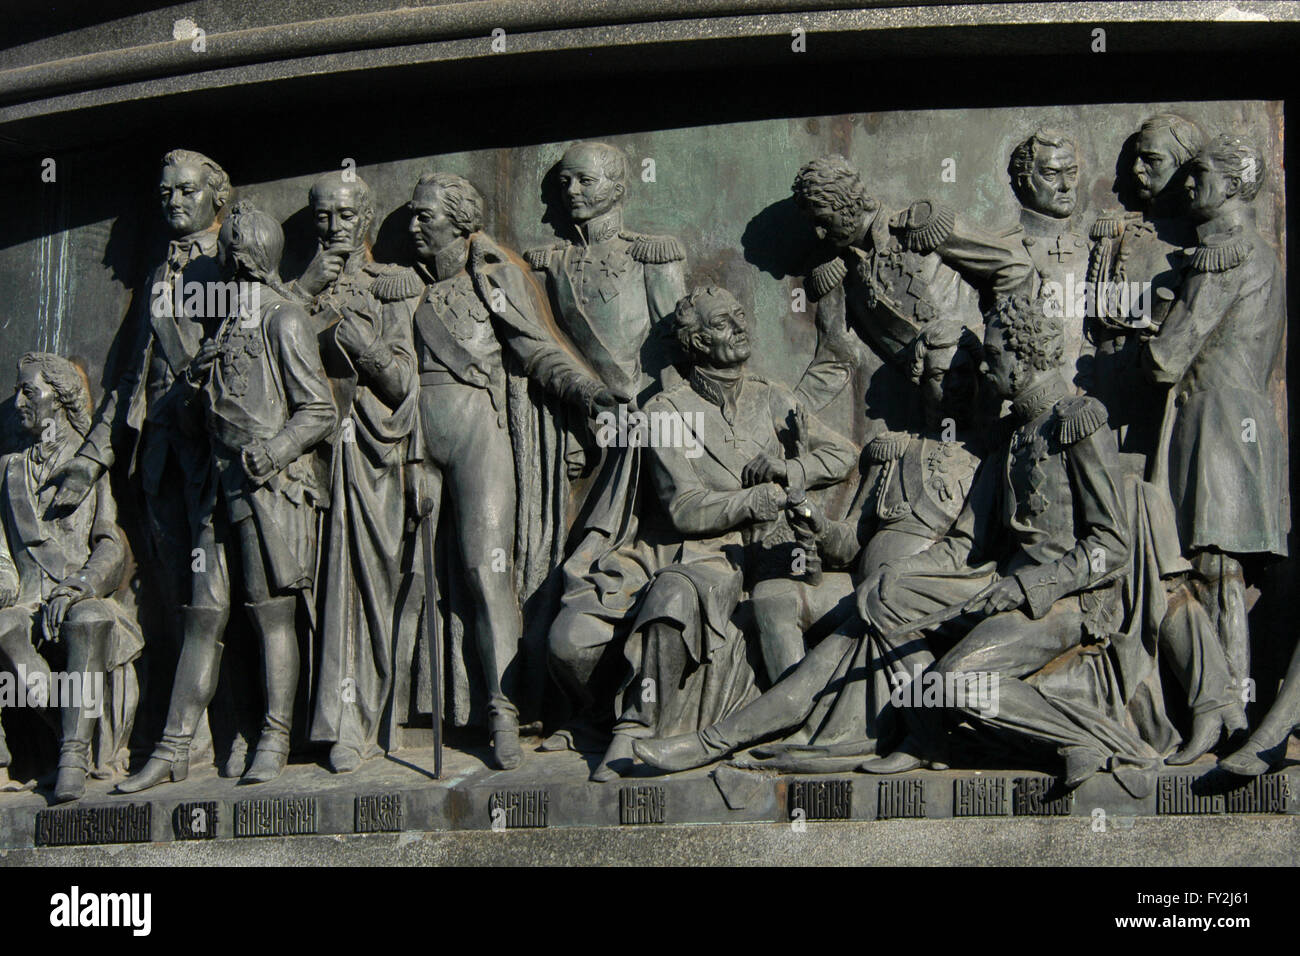 Imperial Russian military leaders depicted in the bas relief dedicated to military leaders and heroes by sculptors Matvey Chizhov and Alexander Lubimov. Detail of the Monument to the Millennium of Russia (1862) designed by Mikhail Mikeshin in Veliky Novgorod, Russia. Persons from left to right: Alexei Orlov (sitting), Pyotr Rumyantsev-Zadunaisky, Alexander Suvorov, Michael Barclay de Tolly, Mikhail Kutuzov, Dmitry Senyavin, Matvei Platov (sitting), Pyotr Bagration, Hans Karl von Diebitsch, Ivan Paskevich (both sitting), Mikhail Lazarev, Vladimir Kornilov and Pavel Nakhimov. Stock Photo